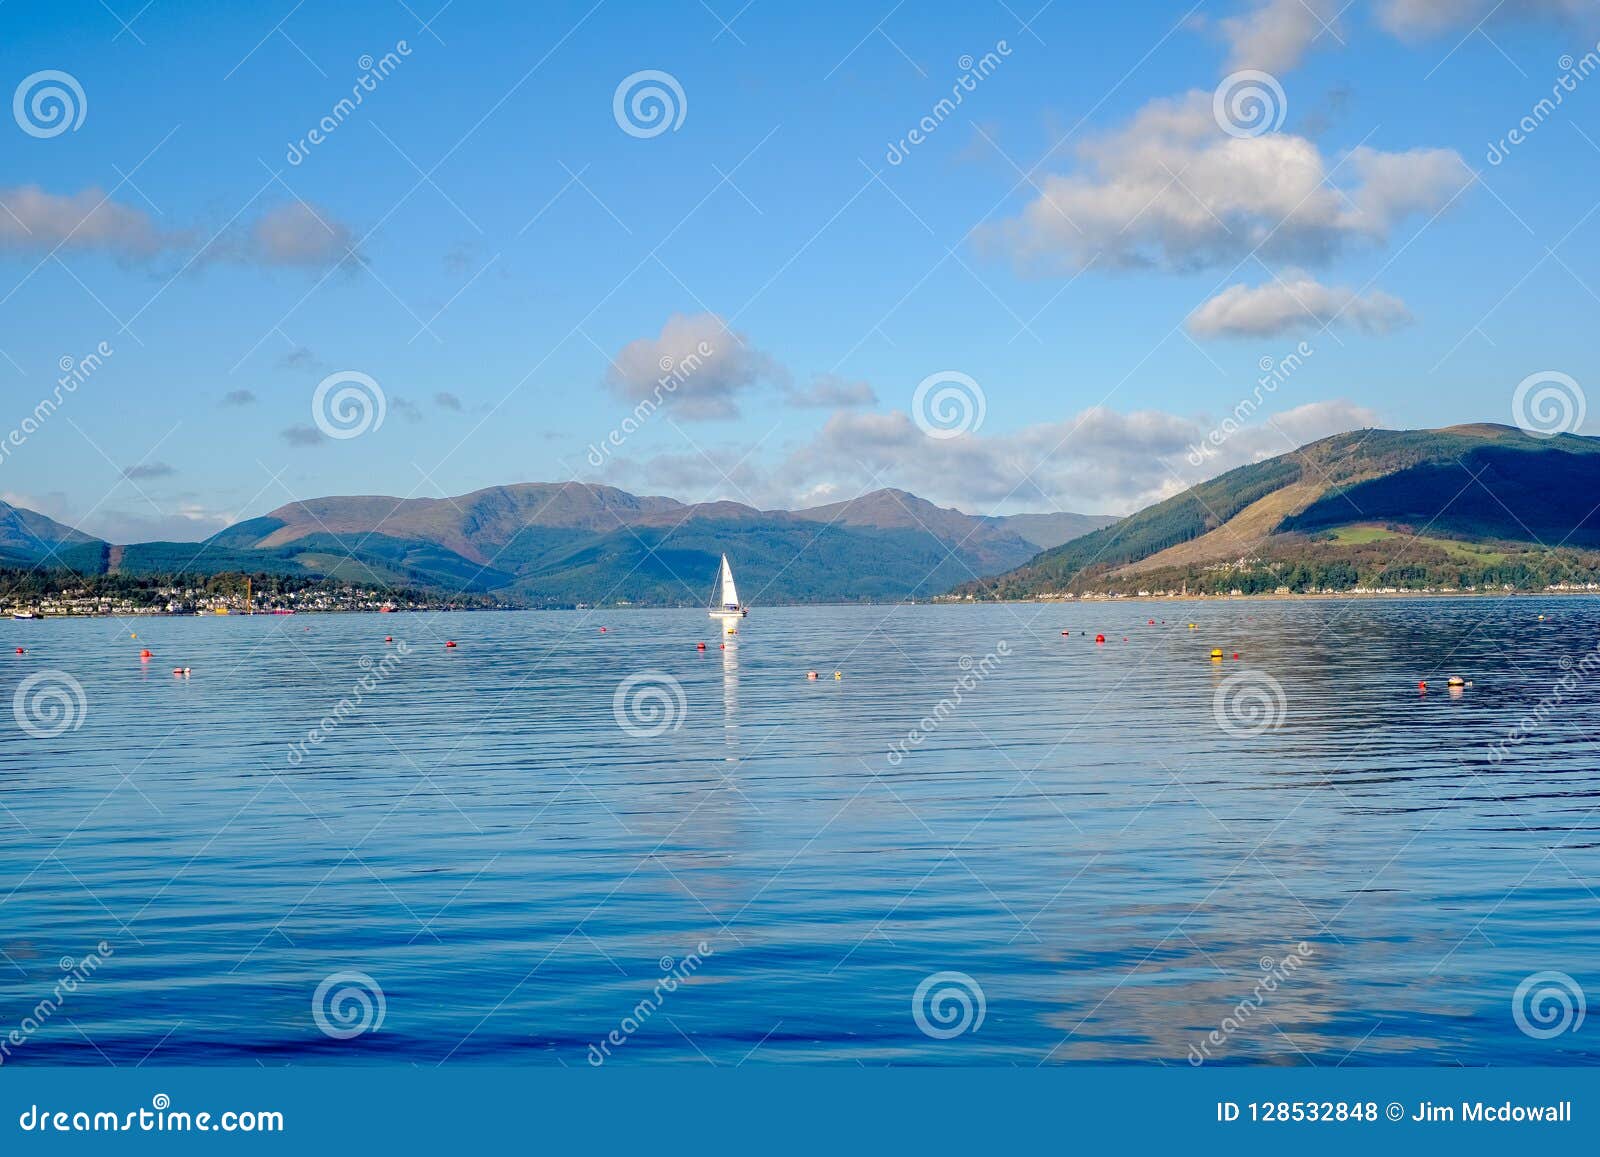 the river clyde up to the hly loch & beyond with a loan yacht &